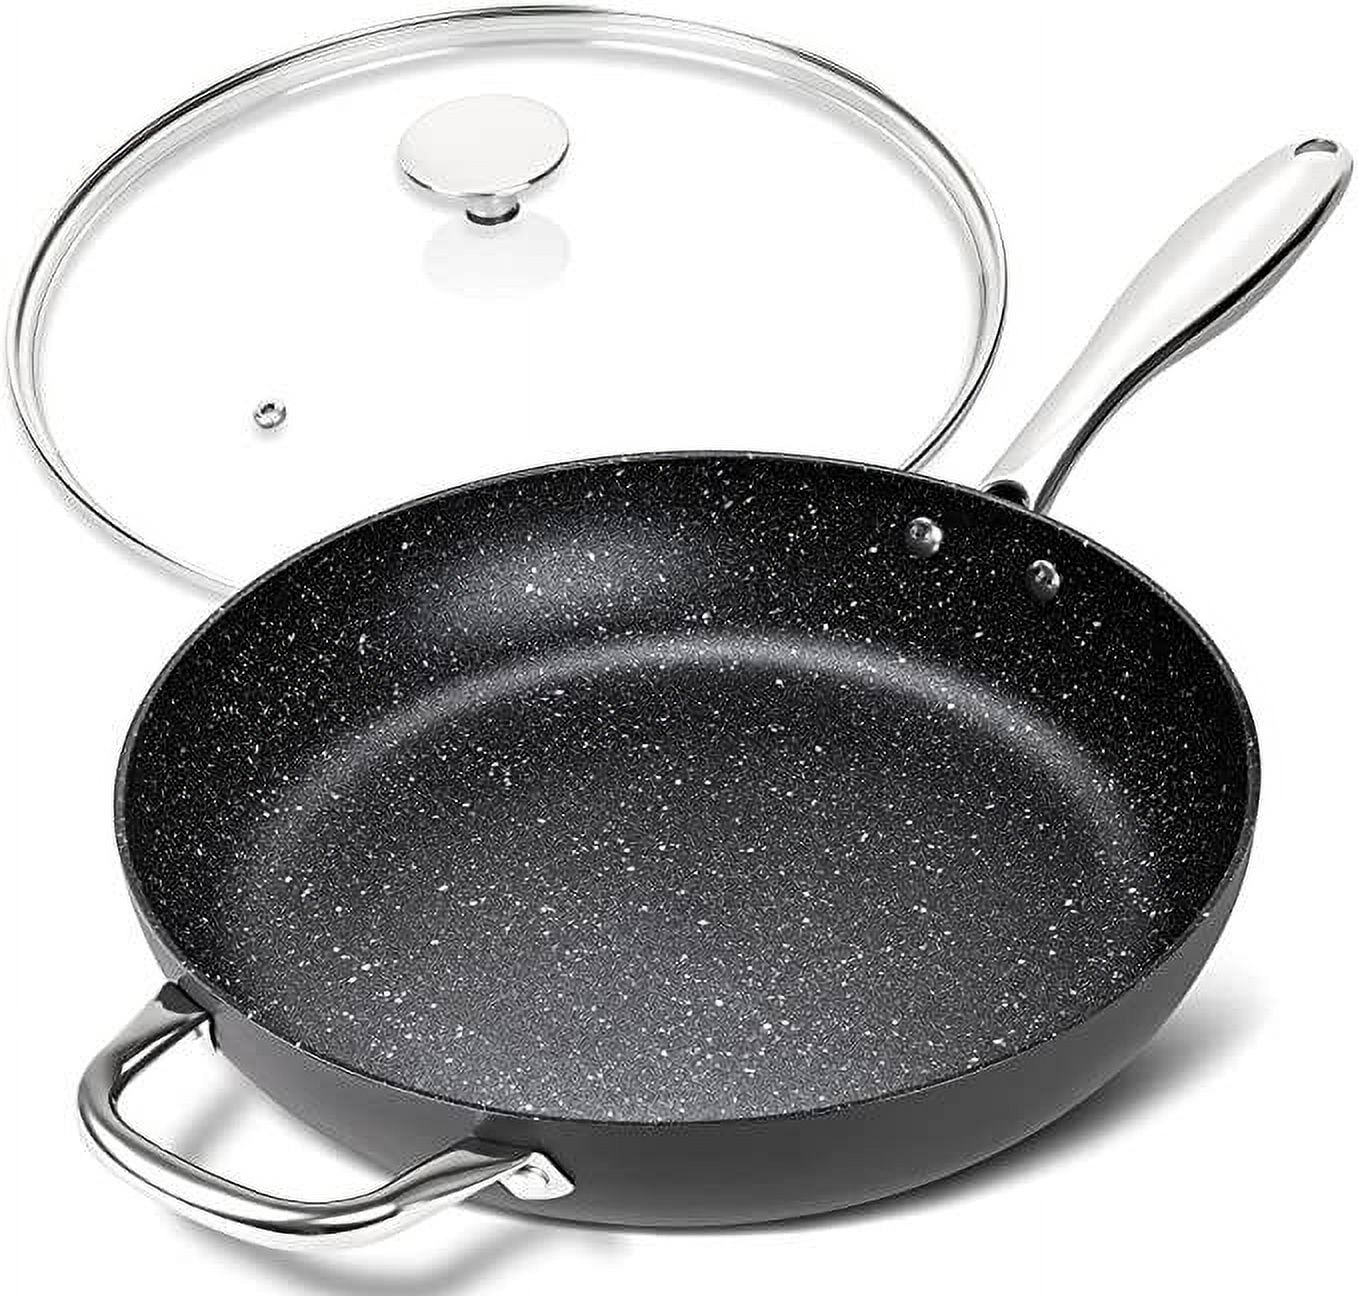 MICHELANGELO 12 Inch Frying Pan with Lid, Hard Anodized Frying Pan